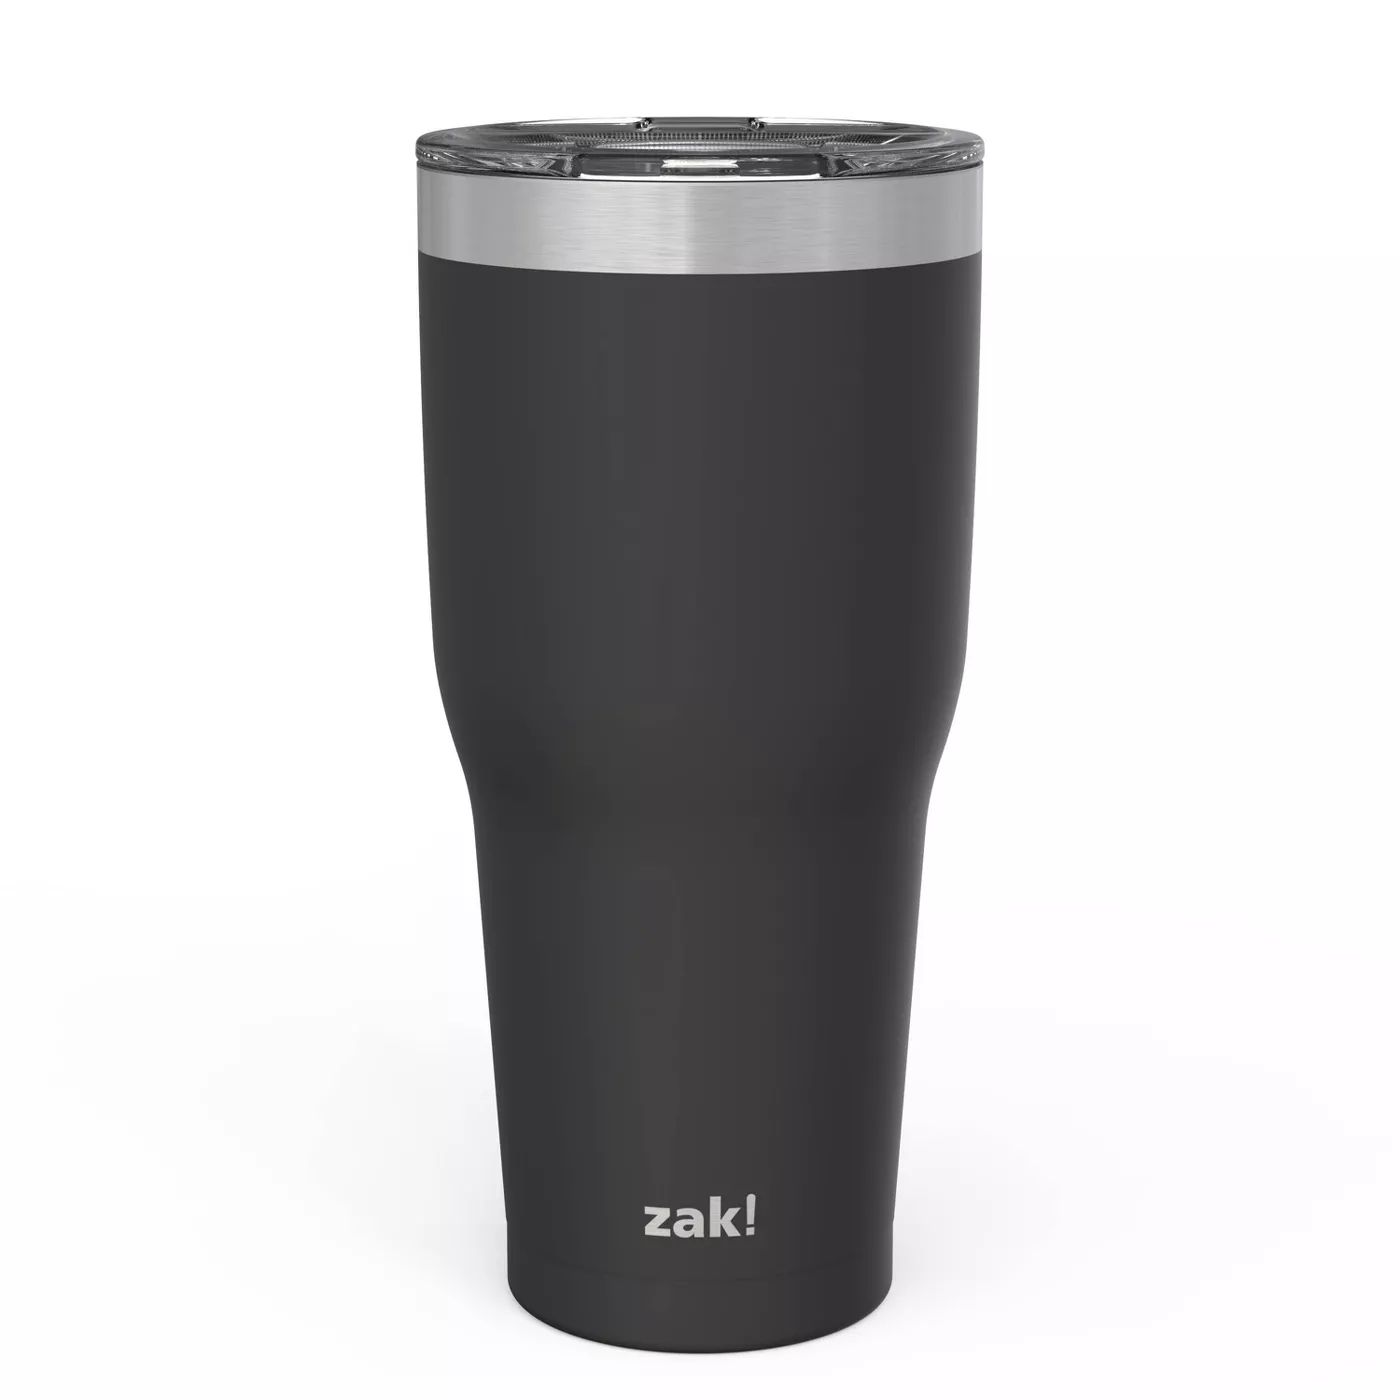 Zak! Designs 30oz Double Wall Stainless Steel Cascadia Tumbler with Contour Lid | Target